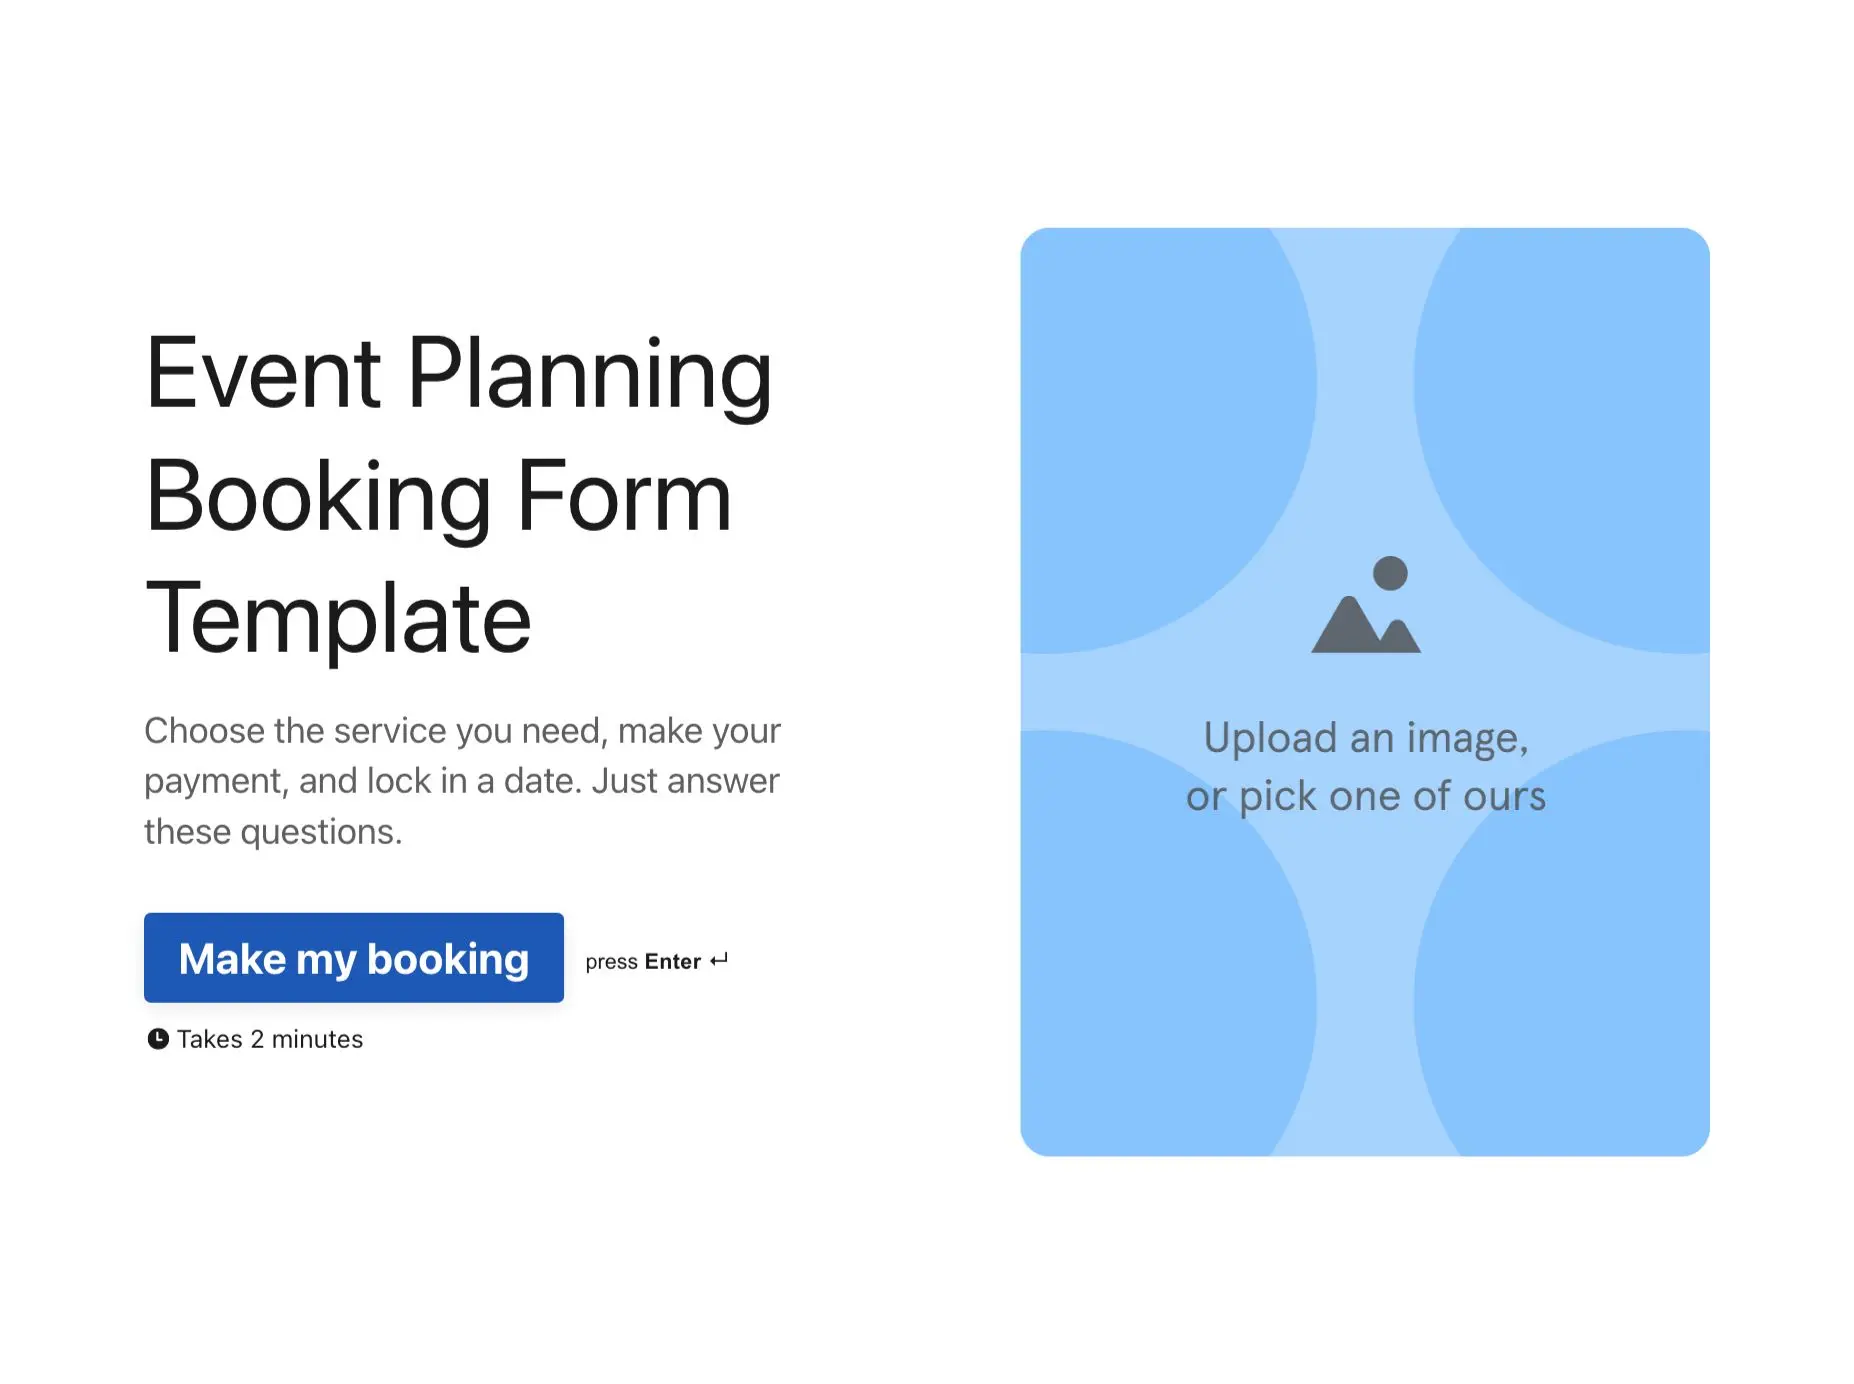 Event Planning Booking Form Template Hero